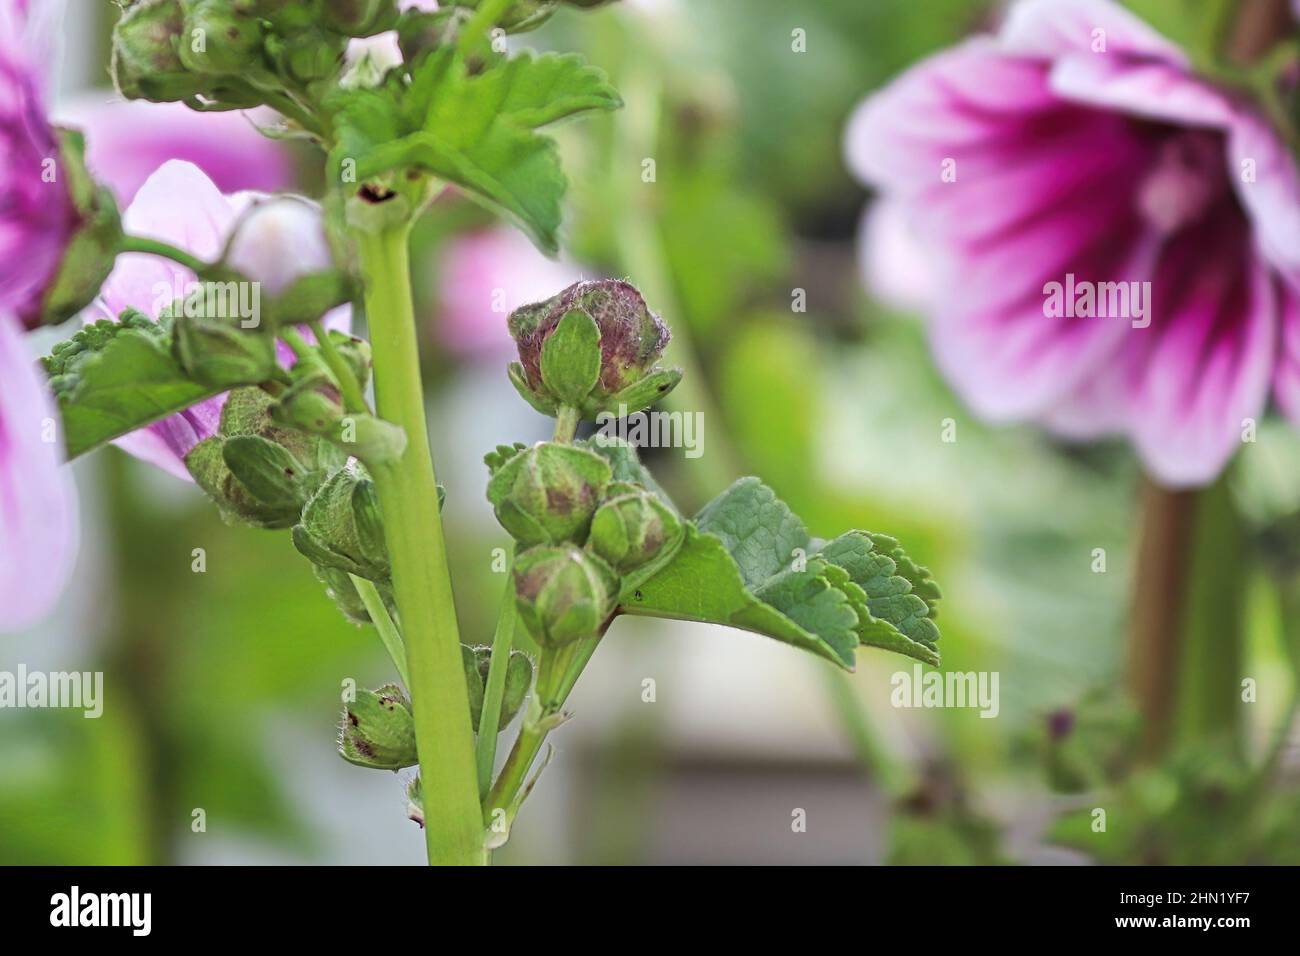 Macro view of the flower buds on a mallow plant. Stock Photo